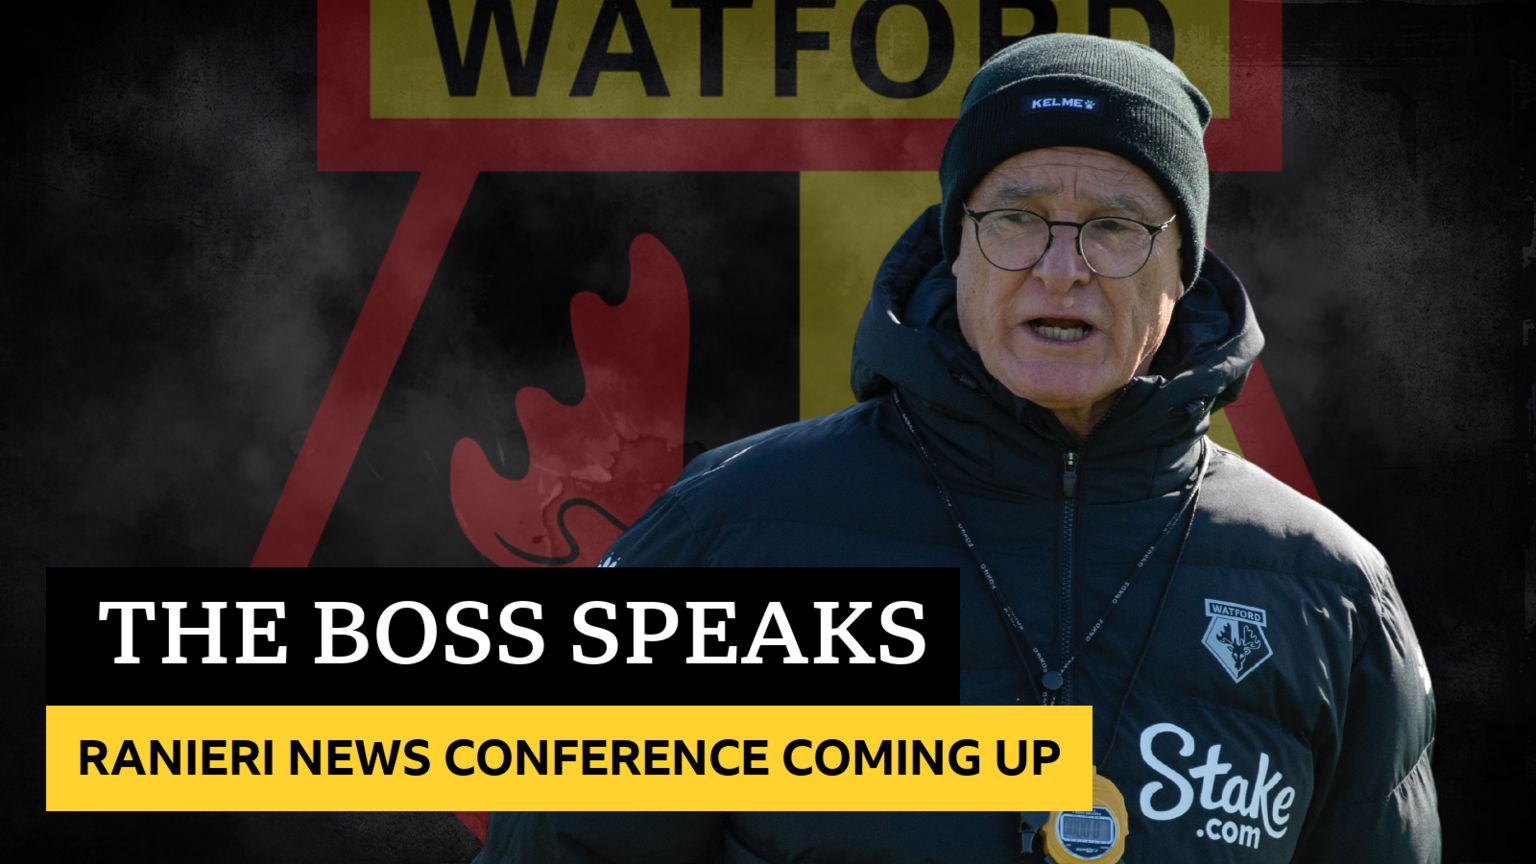 The boss speaks - Ranieri news conference coming up